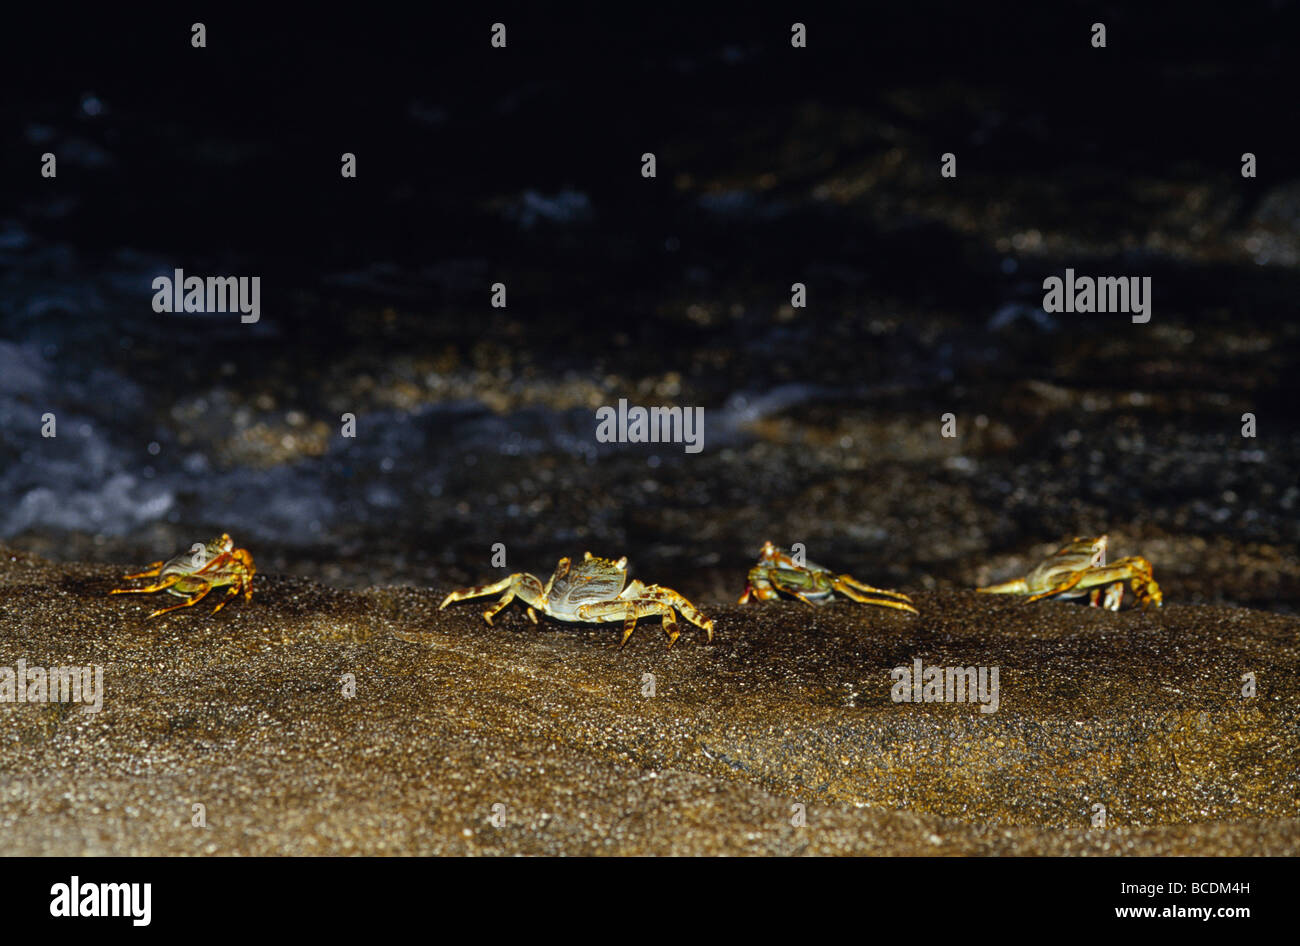 Colorful Grapsid Shore Crabs forage on rocks exposed by the low tide. Stock Photo